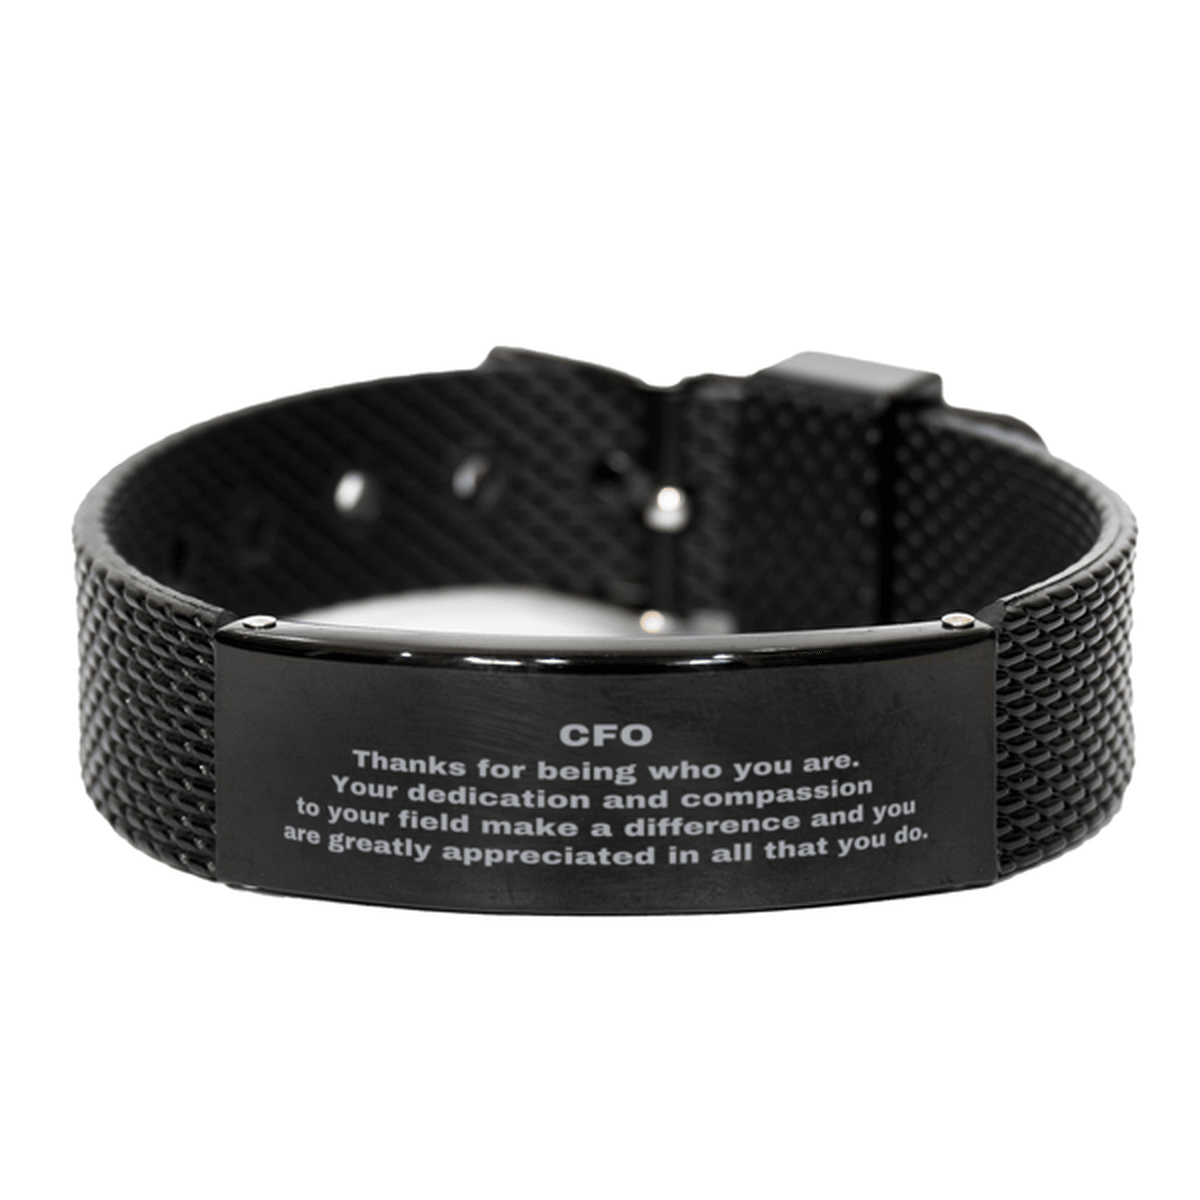 CFO Black Shark Mesh Stainless Steel Engraved Bracelet - Thanks for being who you are - Birthday Christmas Jewelry Gifts Coworkers Colleague Boss - Mallard Moon Gift Shop